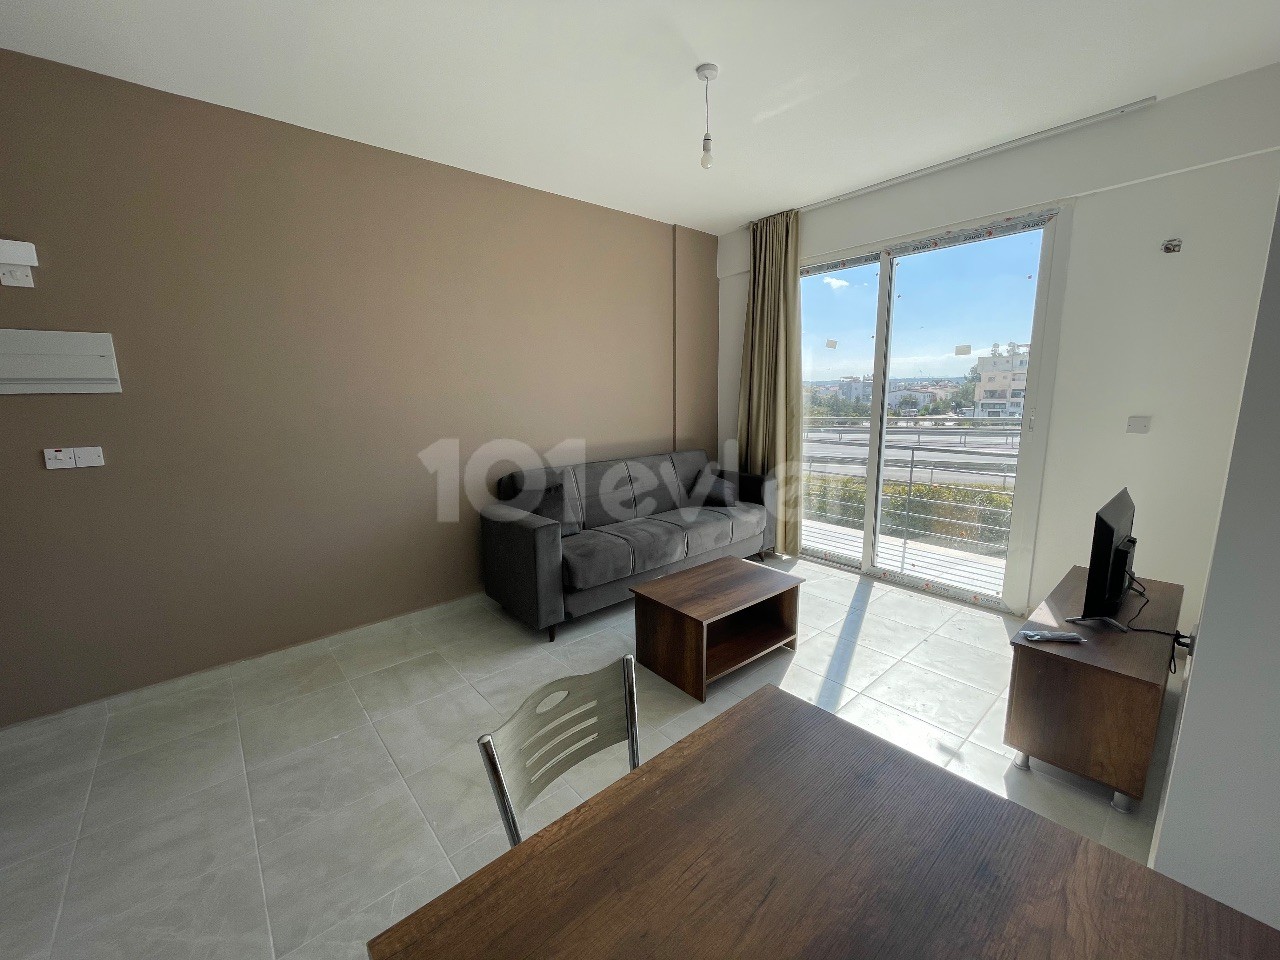 Gonyeli /2+1 Fully Furnished New Apartments for Rent in Yenikent ** 